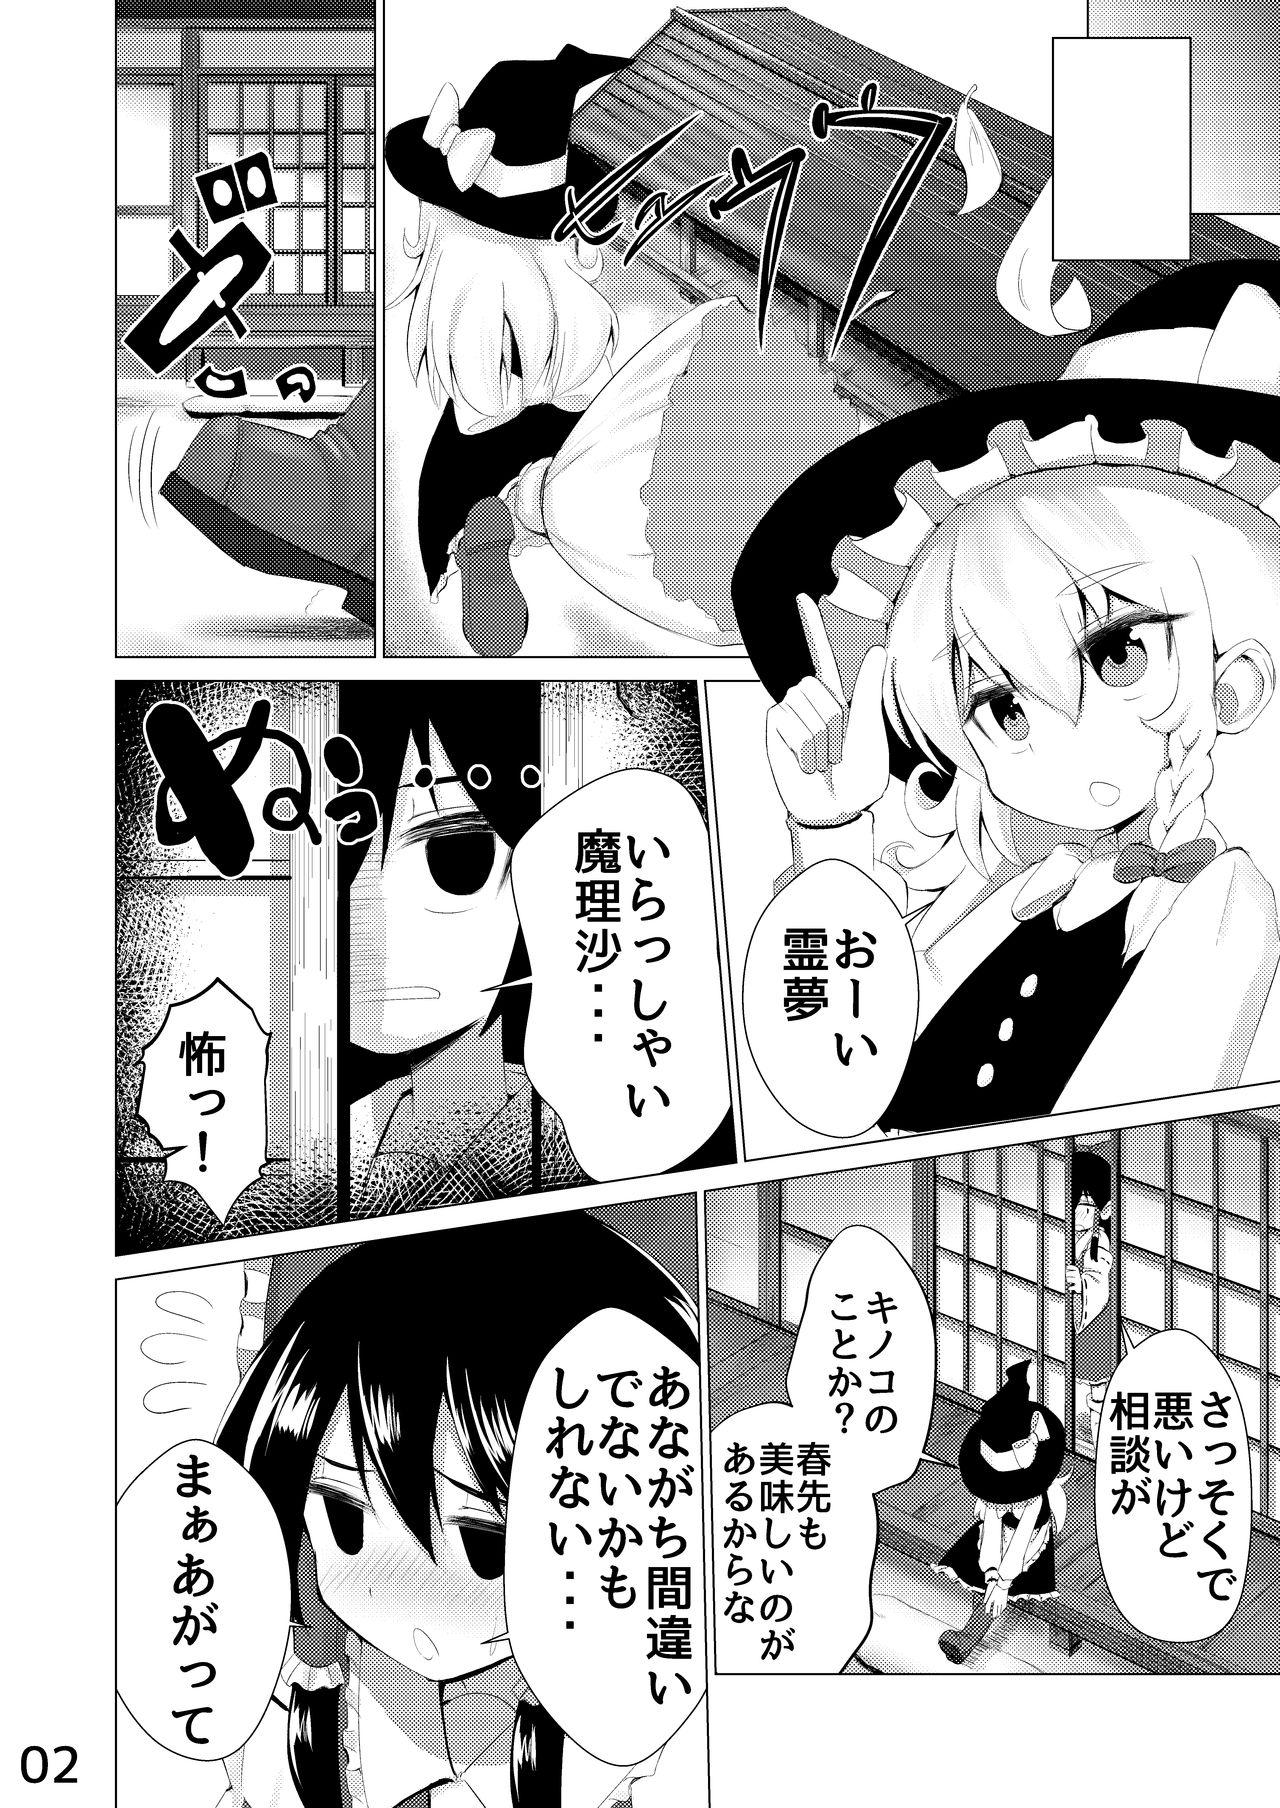 Milfs [NO相撲KING (吸斬) 生えた (Touhou Project) [Digital] - Touhou project Tites - Page 3